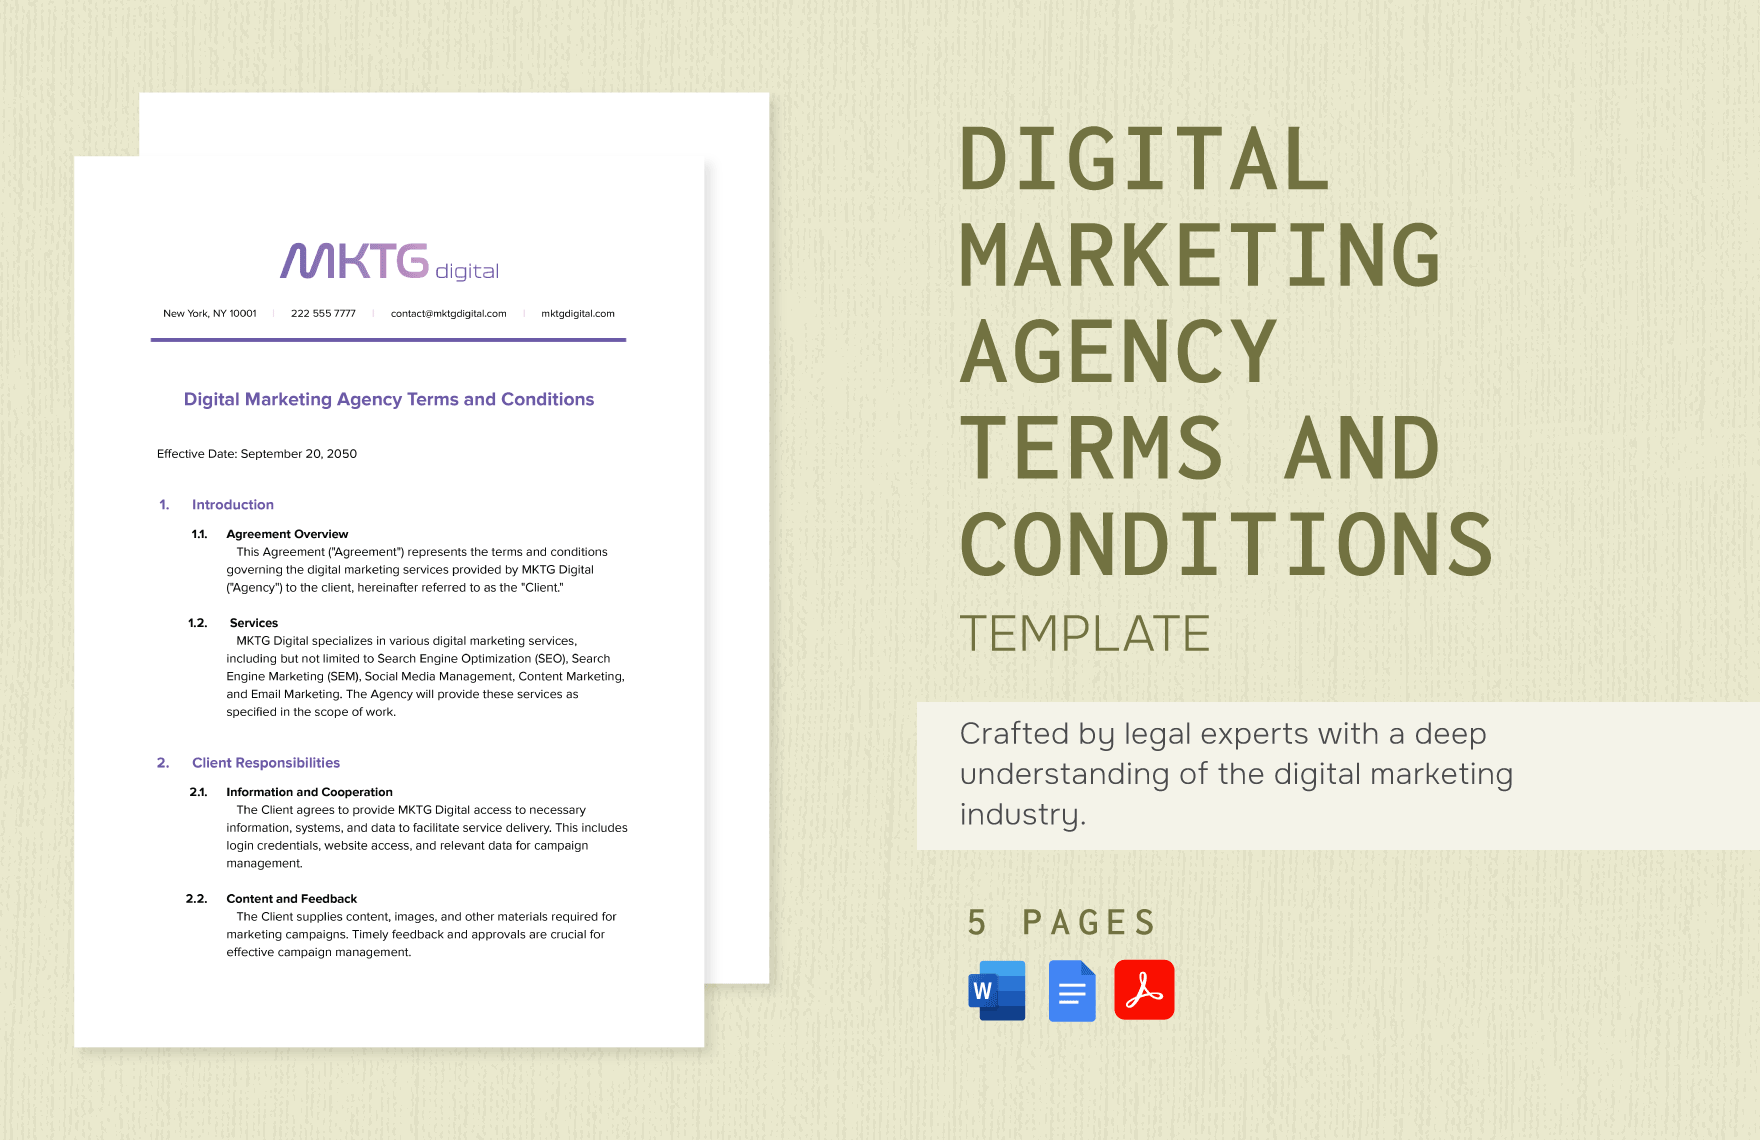 Digital Marketing Agency Terms and Conditions Template